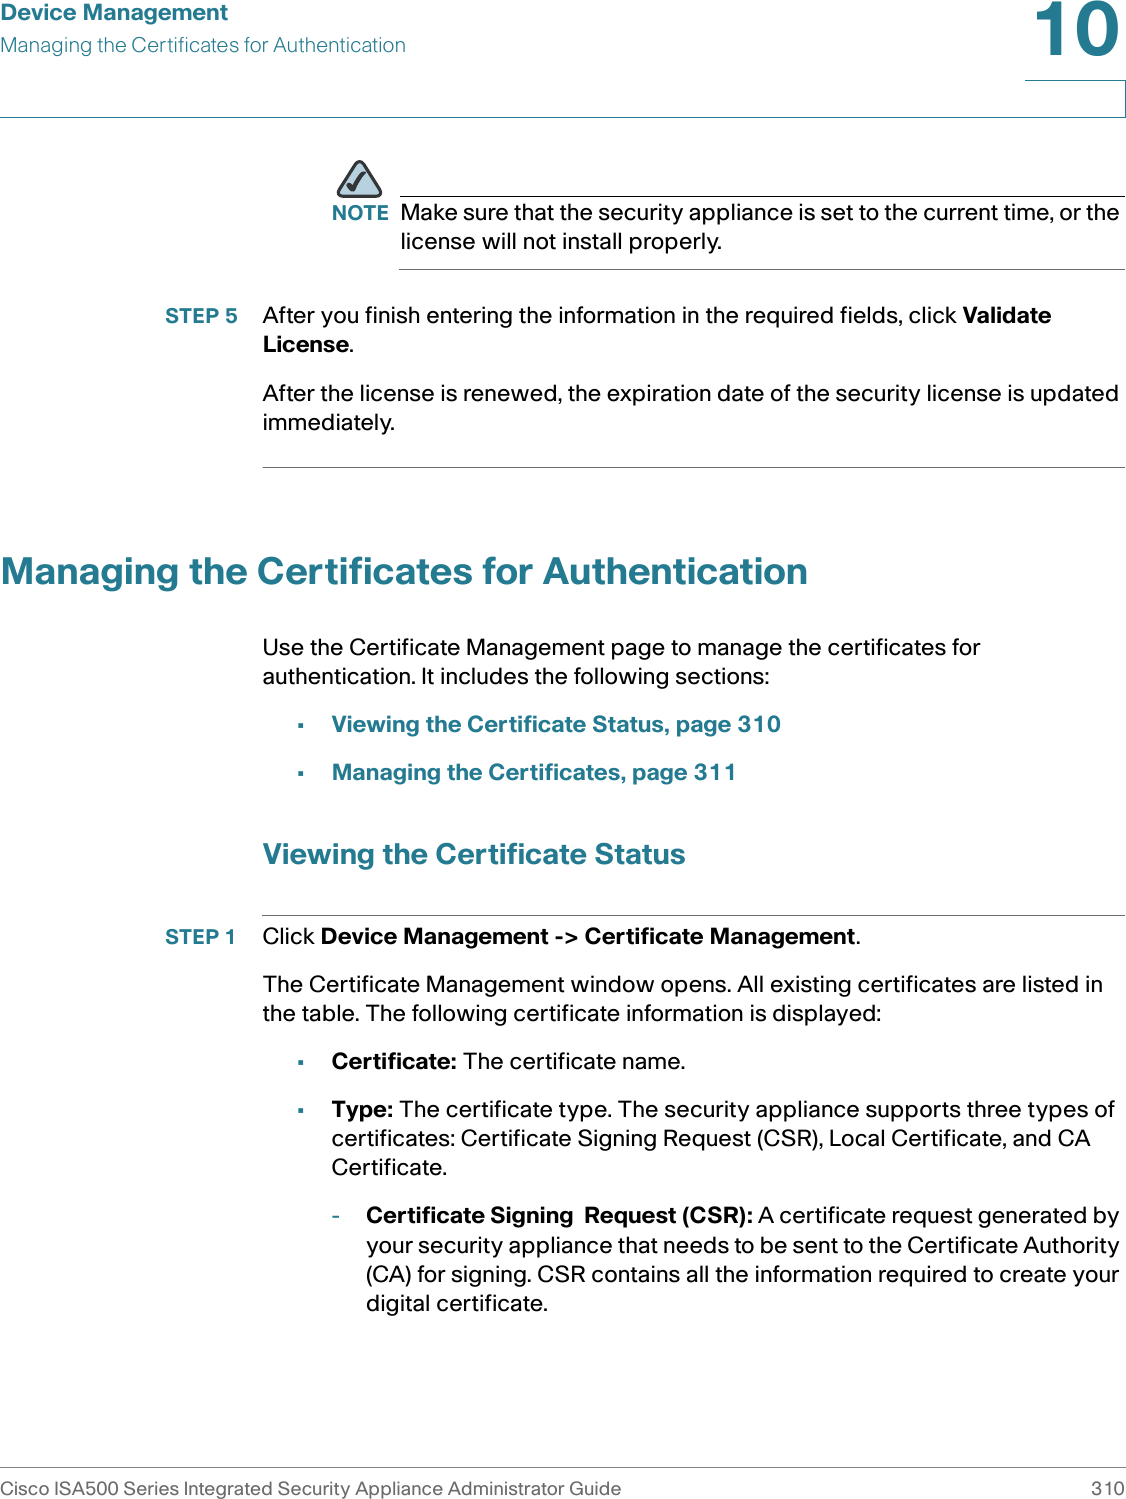 Device ManagementManaging the Certificates for AuthenticationCisco ISA500 Series Integrated Security Appliance Administrator Guide 31010 NOTE Make sure that the security appliance is set to the current time, or the license will not install properly. STEP 5 After you finish entering the information in the required fields, click Validate License. After the license is renewed, the expiration date of the security license is updated immediately. Managing the Certificates for AuthenticationUse the Certificate Management page to manage the certificates for authentication. It includes the following sections:•Viewing the Certificate Status, page 310•Managing the Certificates, page 311Viewing the Certificate StatusSTEP 1 Click Device Management -&gt; Certificate Management.The Certificate Management window opens. All existing certificates are listed in the table. The following certificate information is displayed: •Certificate: The certificate name.•Type: The certificate type. The security appliance supports three types of certificates: Certificate Signing Request (CSR), Local Certificate, and CA Certificate.-Certificate Signing  Request (CSR): A certificate request generated by your security appliance that needs to be sent to the Certificate Authority (CA) for signing. CSR contains all the information required to create your digital certificate. 